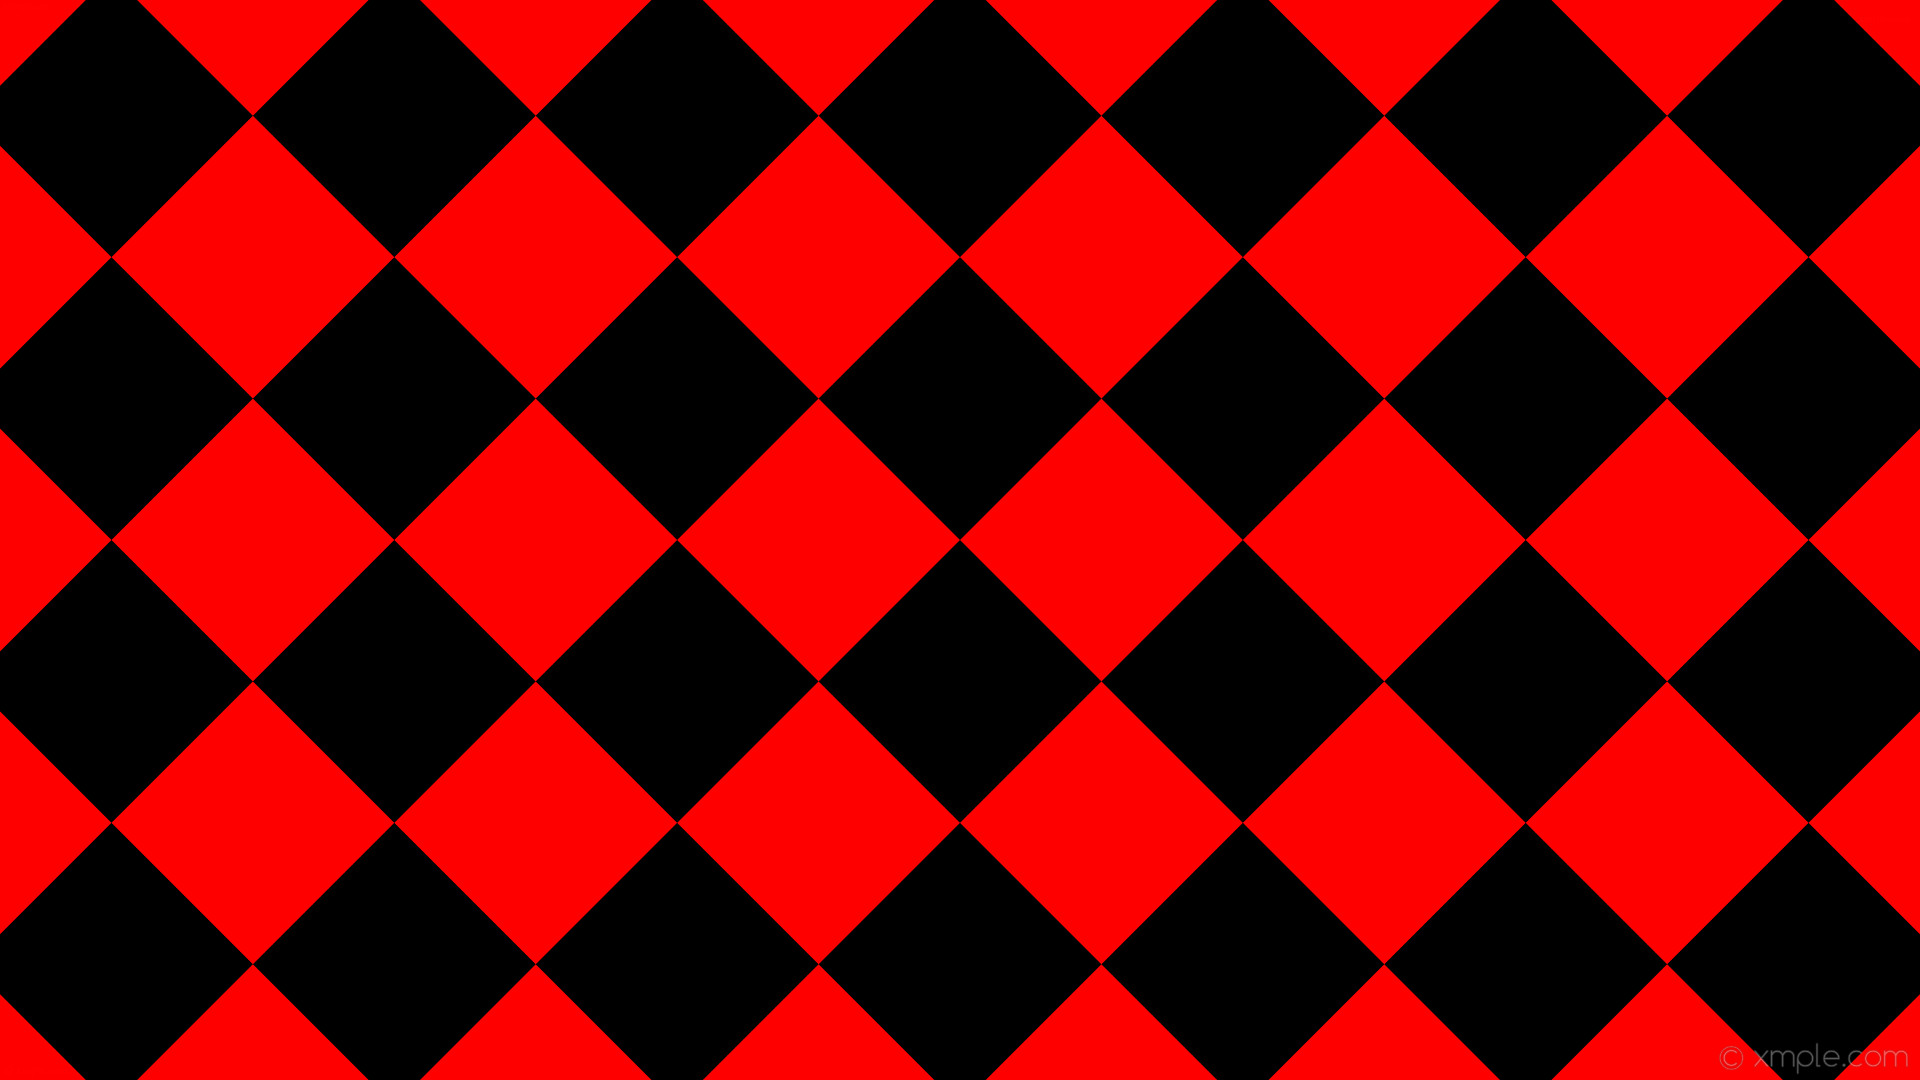 1920x1080 Black And Red Checkered Wallpaper